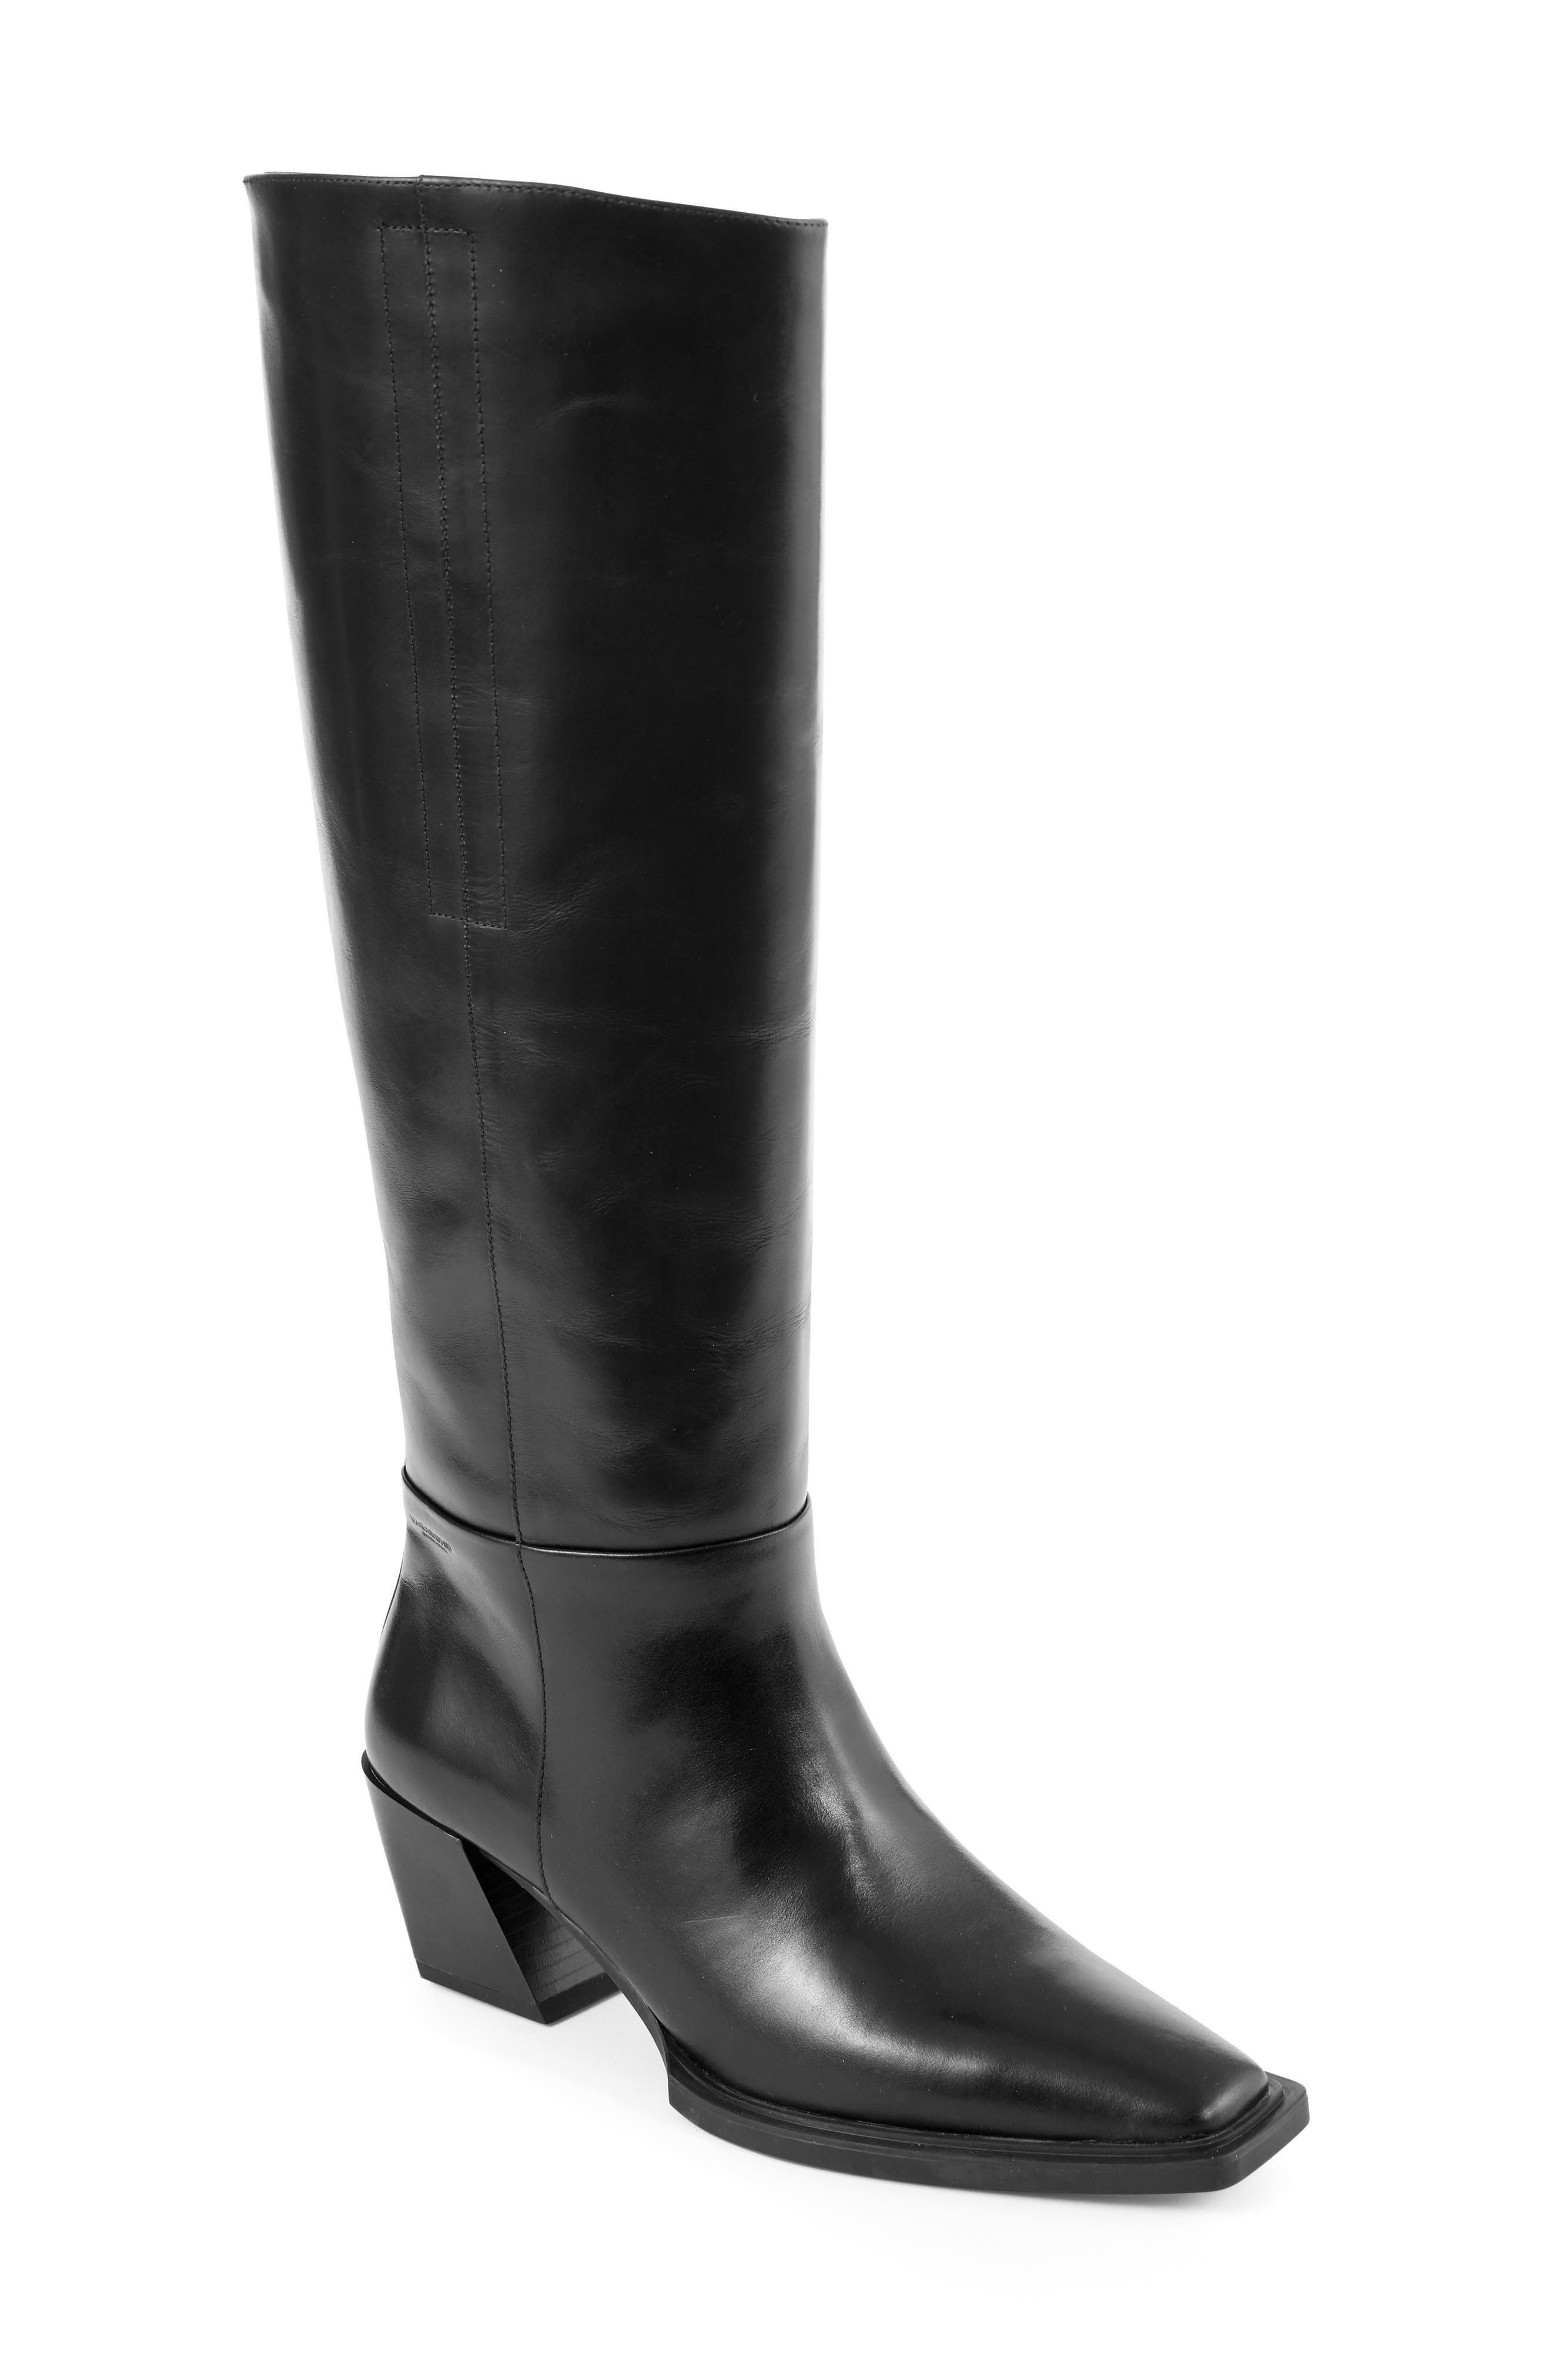 Vagabond Shoemakers Alina Knee High Boot in Black at Nordstrom, Size 6Us | Nordstrom